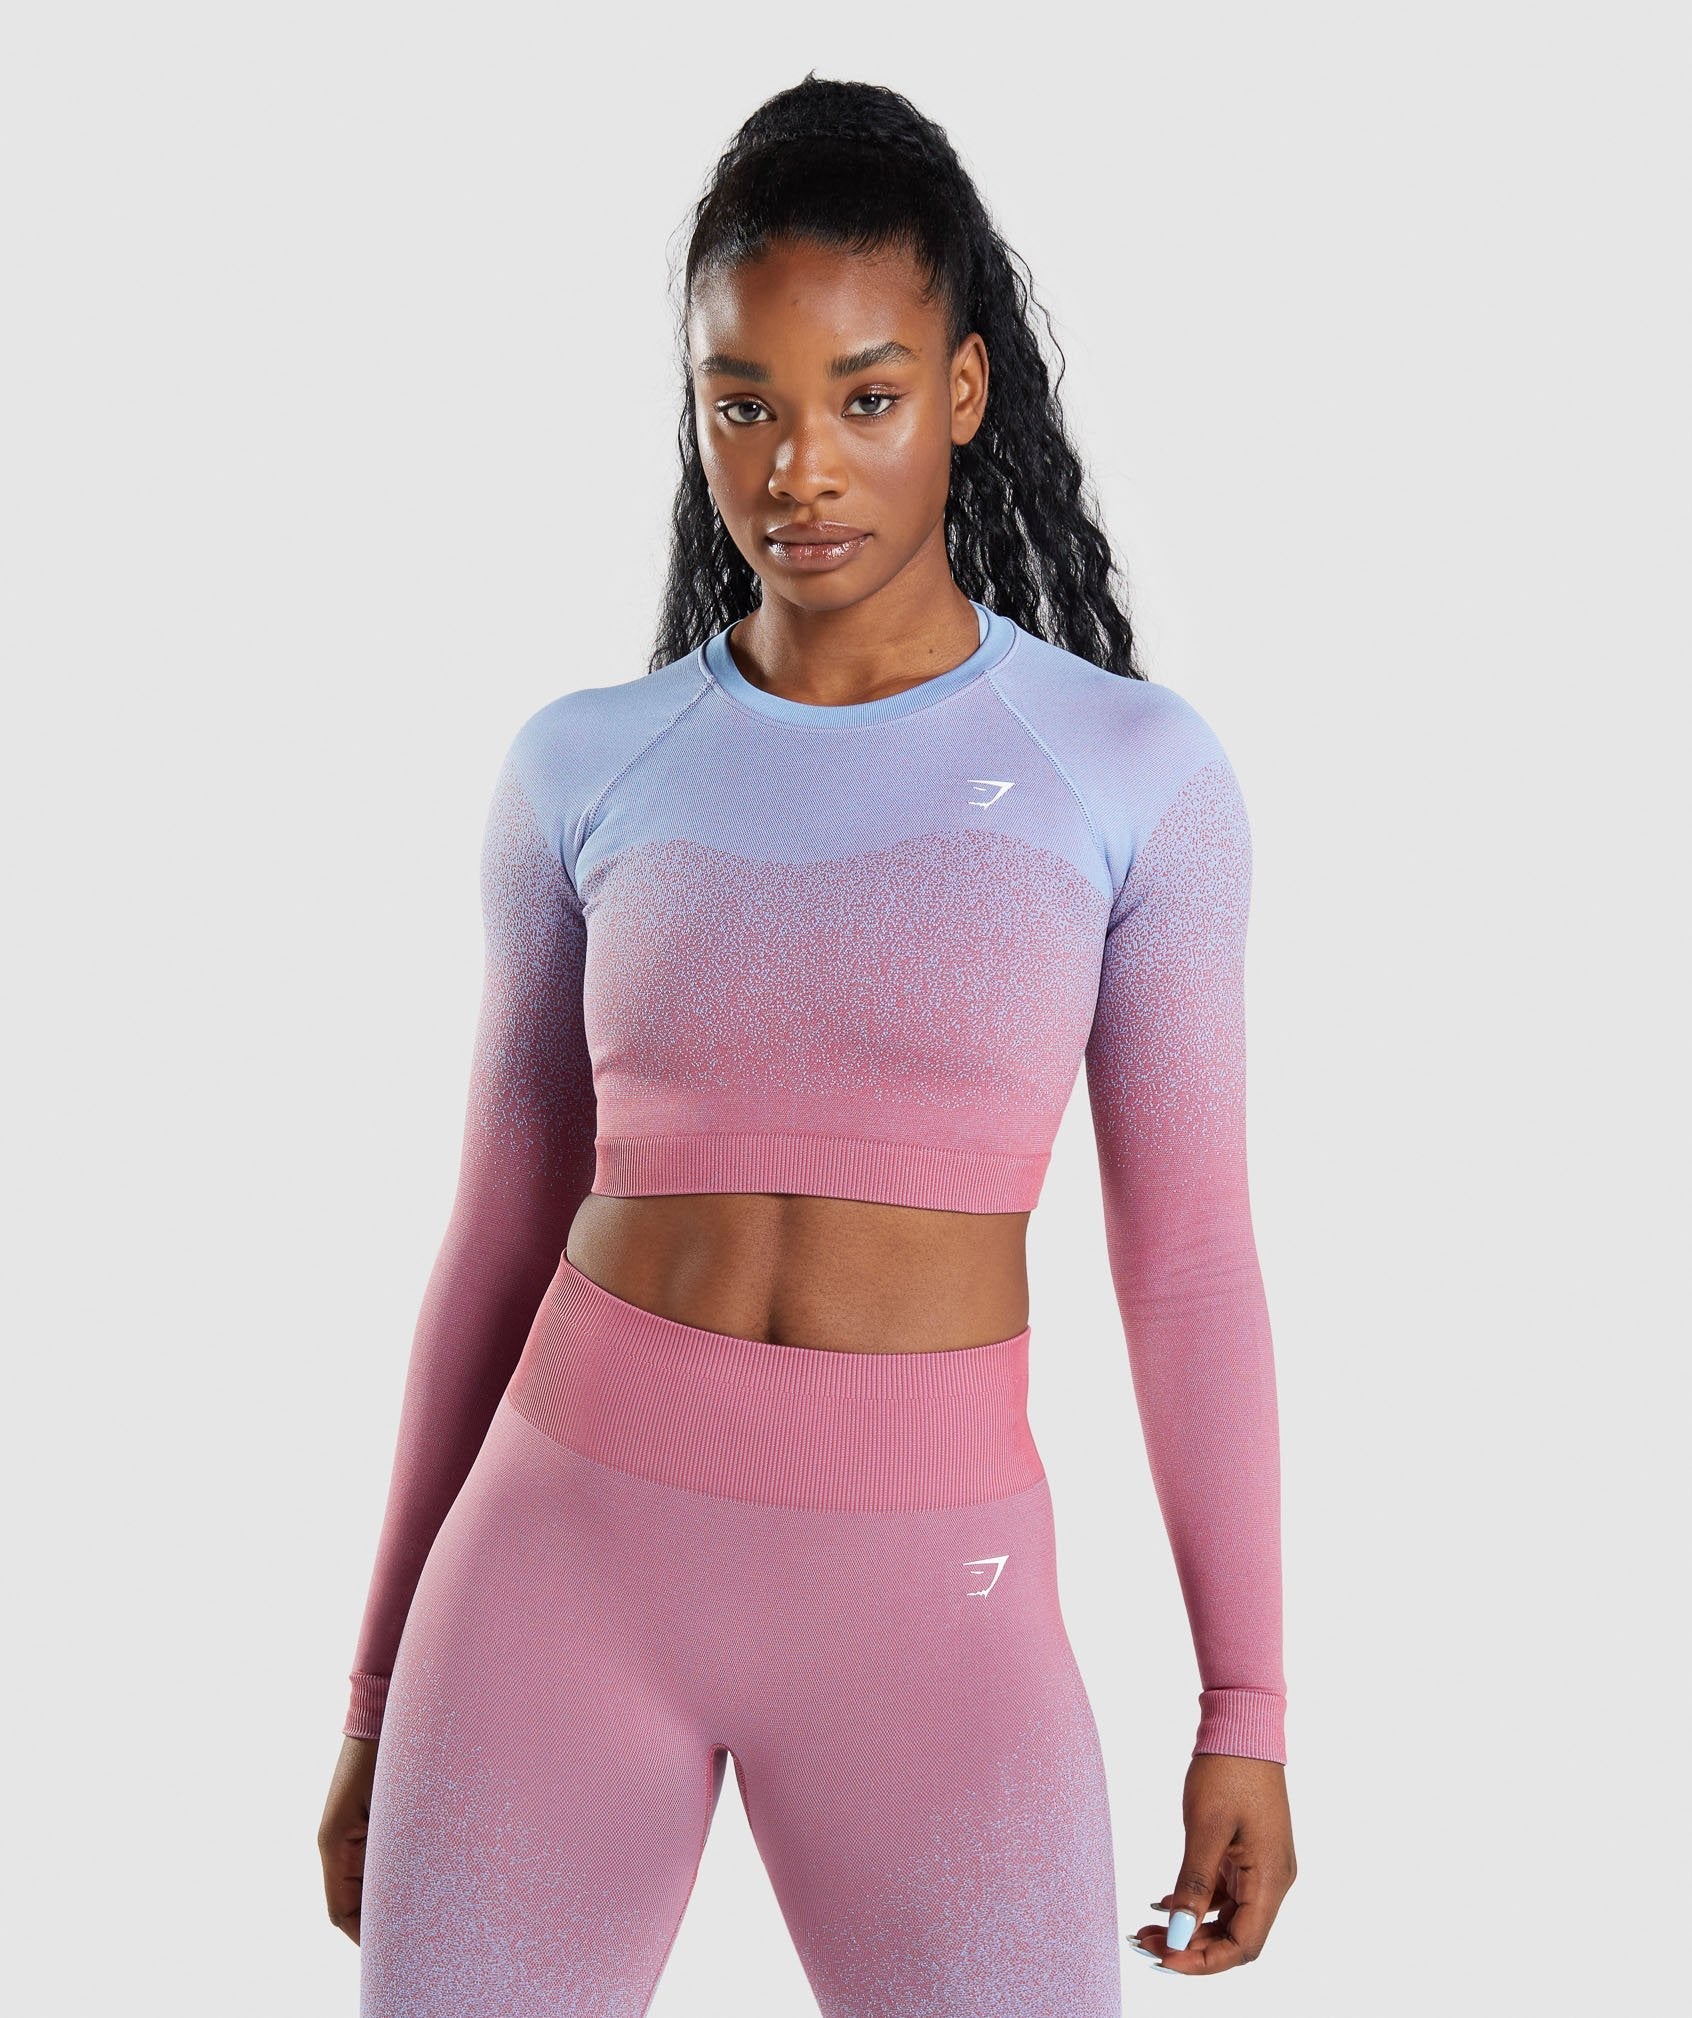 Gymshark NEW RELEASES, VITAL SEAMLESS 2.0, Adapt Ombré, Release & More